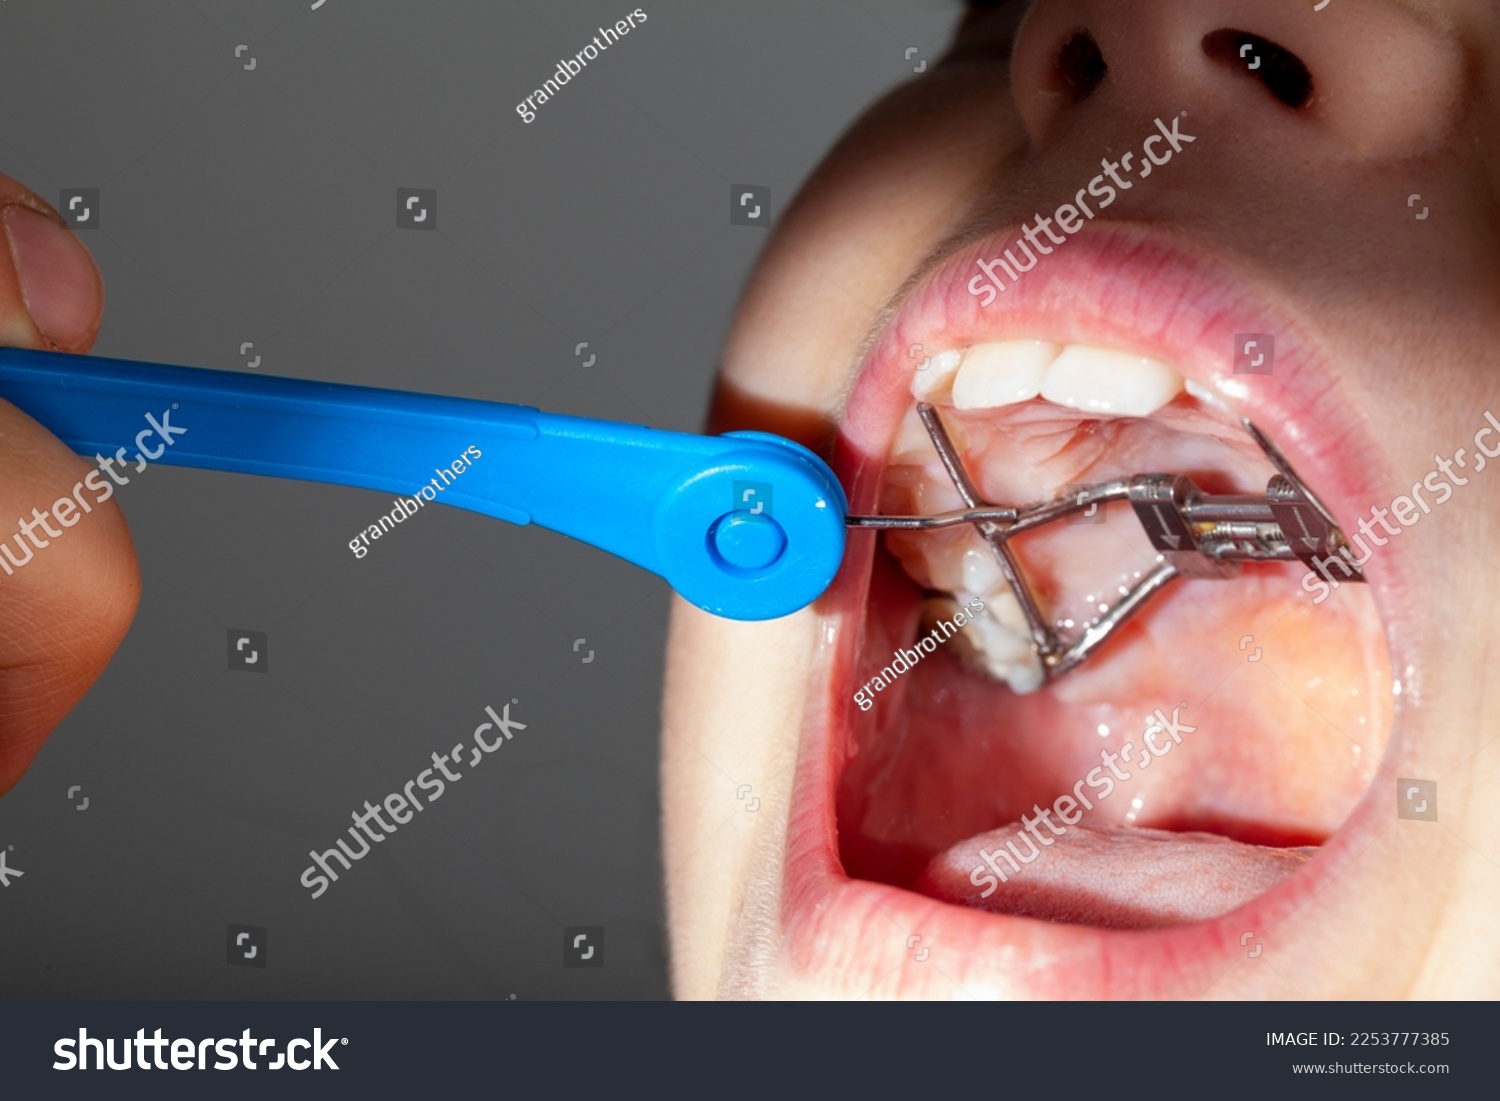 Close up isolated image of a young caucasian girl opening her mouth wide. On upper jaw there is a palatal expander and orthodontist or parent uses a turn key to rotate the screw and adjust expansion. #2253777385